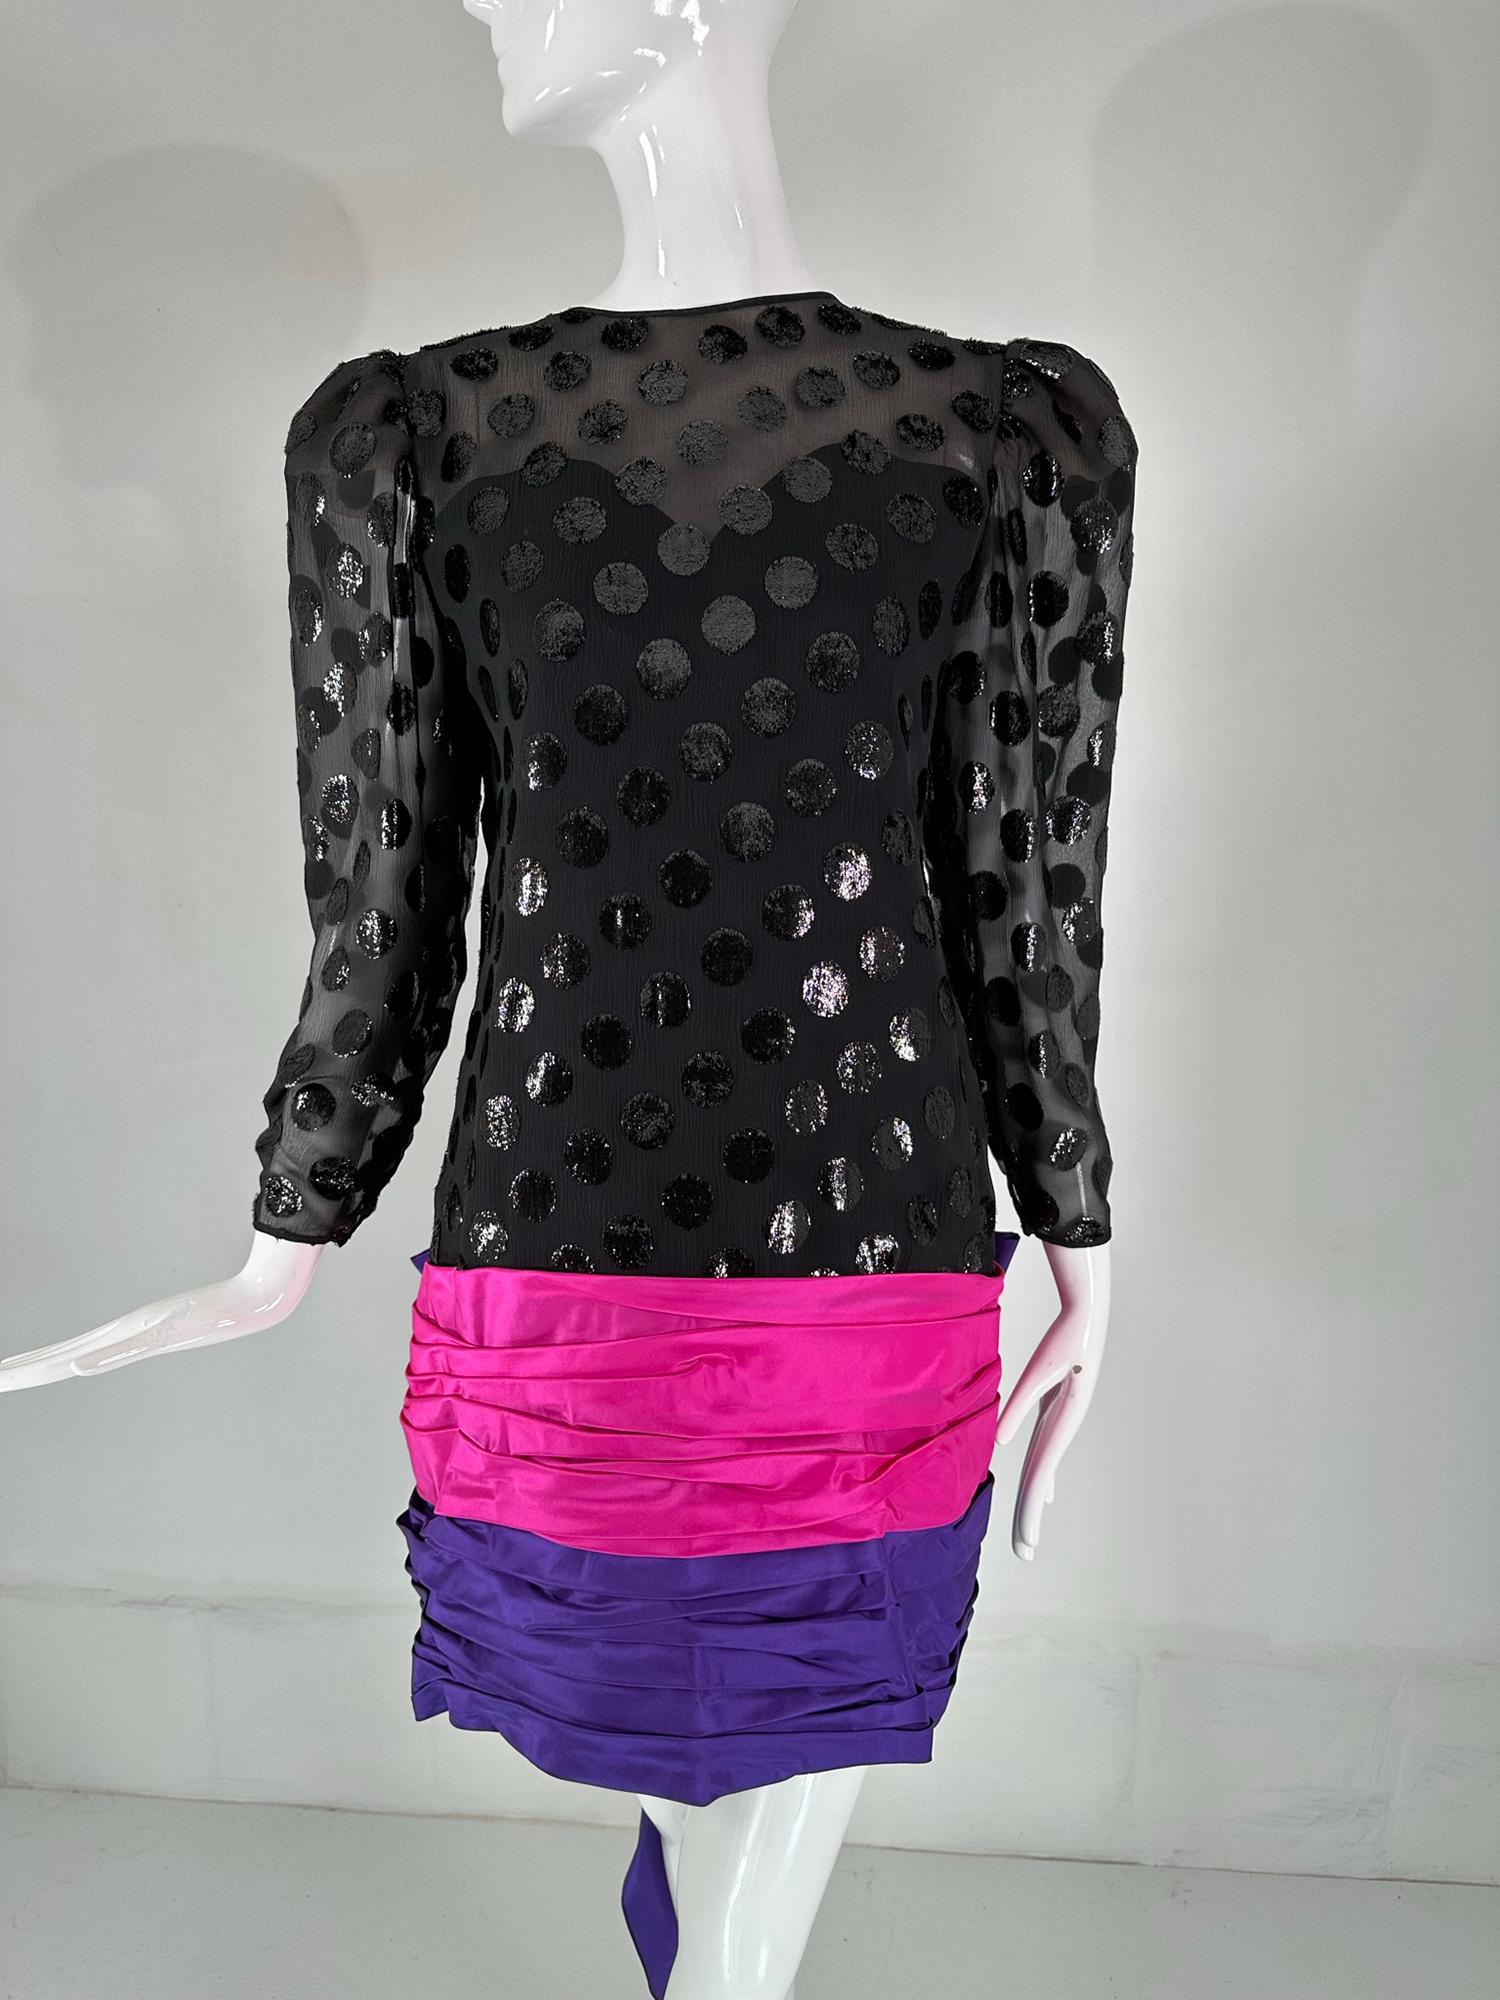 1980s Black cut velvet with large sparkly velvet dots. V back neck with horizontally draped pink & purple taffeta skirt and a huge bow at the hip back. LA fabulous party dress from the 1980s. Long sleeves with a poof shoulder that tapers to the